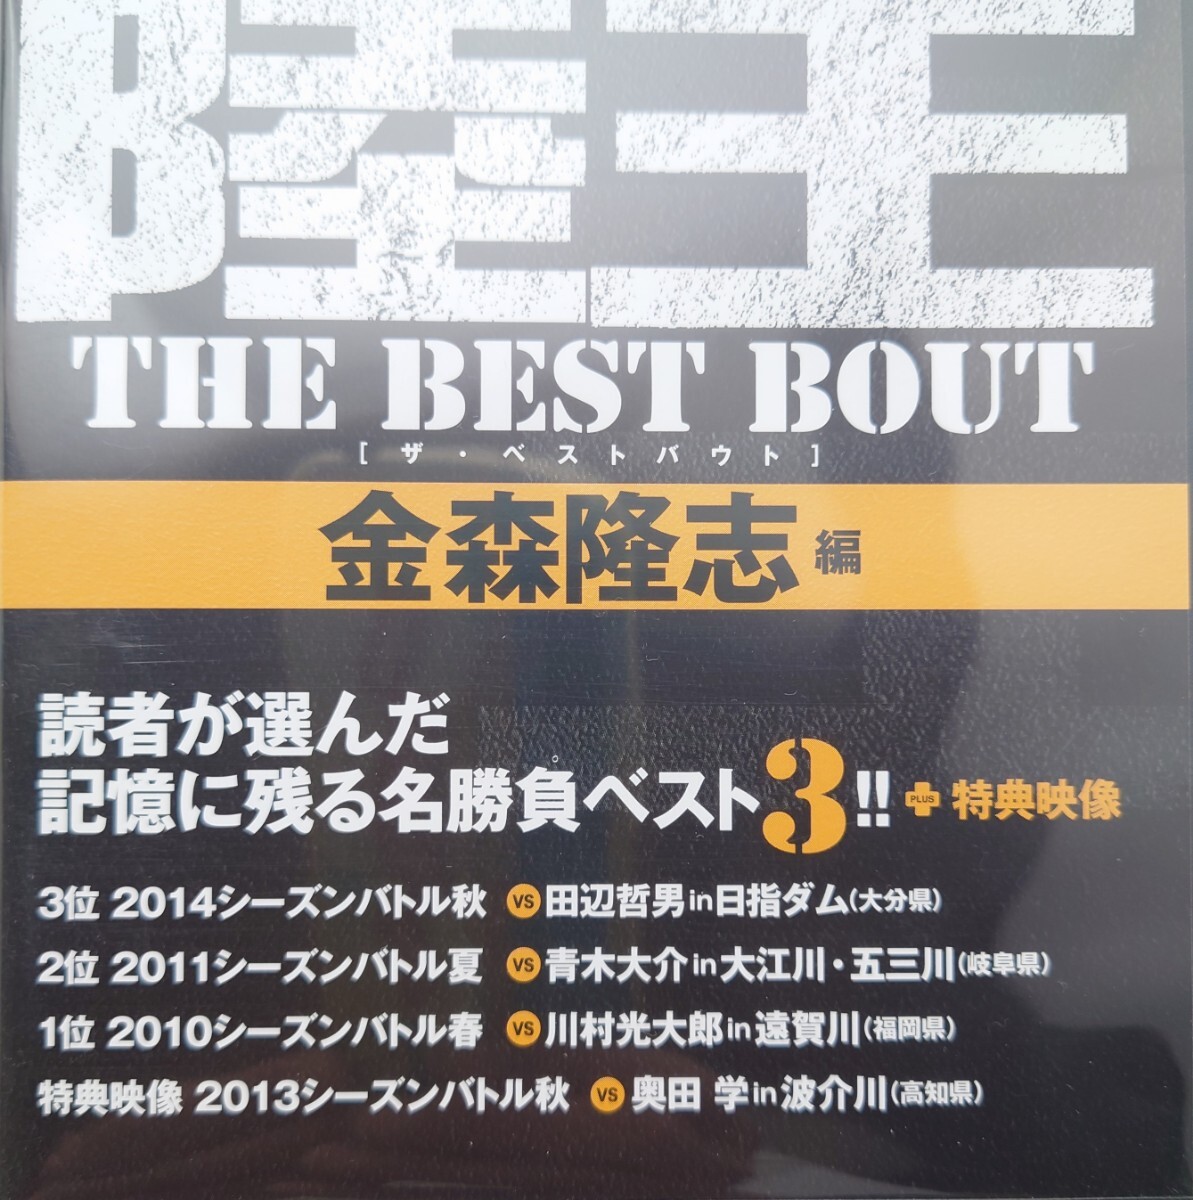 [DVD] land .THE BEST BOUT/ The * the best bow to gold forest .. compilation / also .: Aoki large ., rice field side . man, river . light large . another [170 minute +180 minute = total 350 minute /2 sheets set /ruamaga]